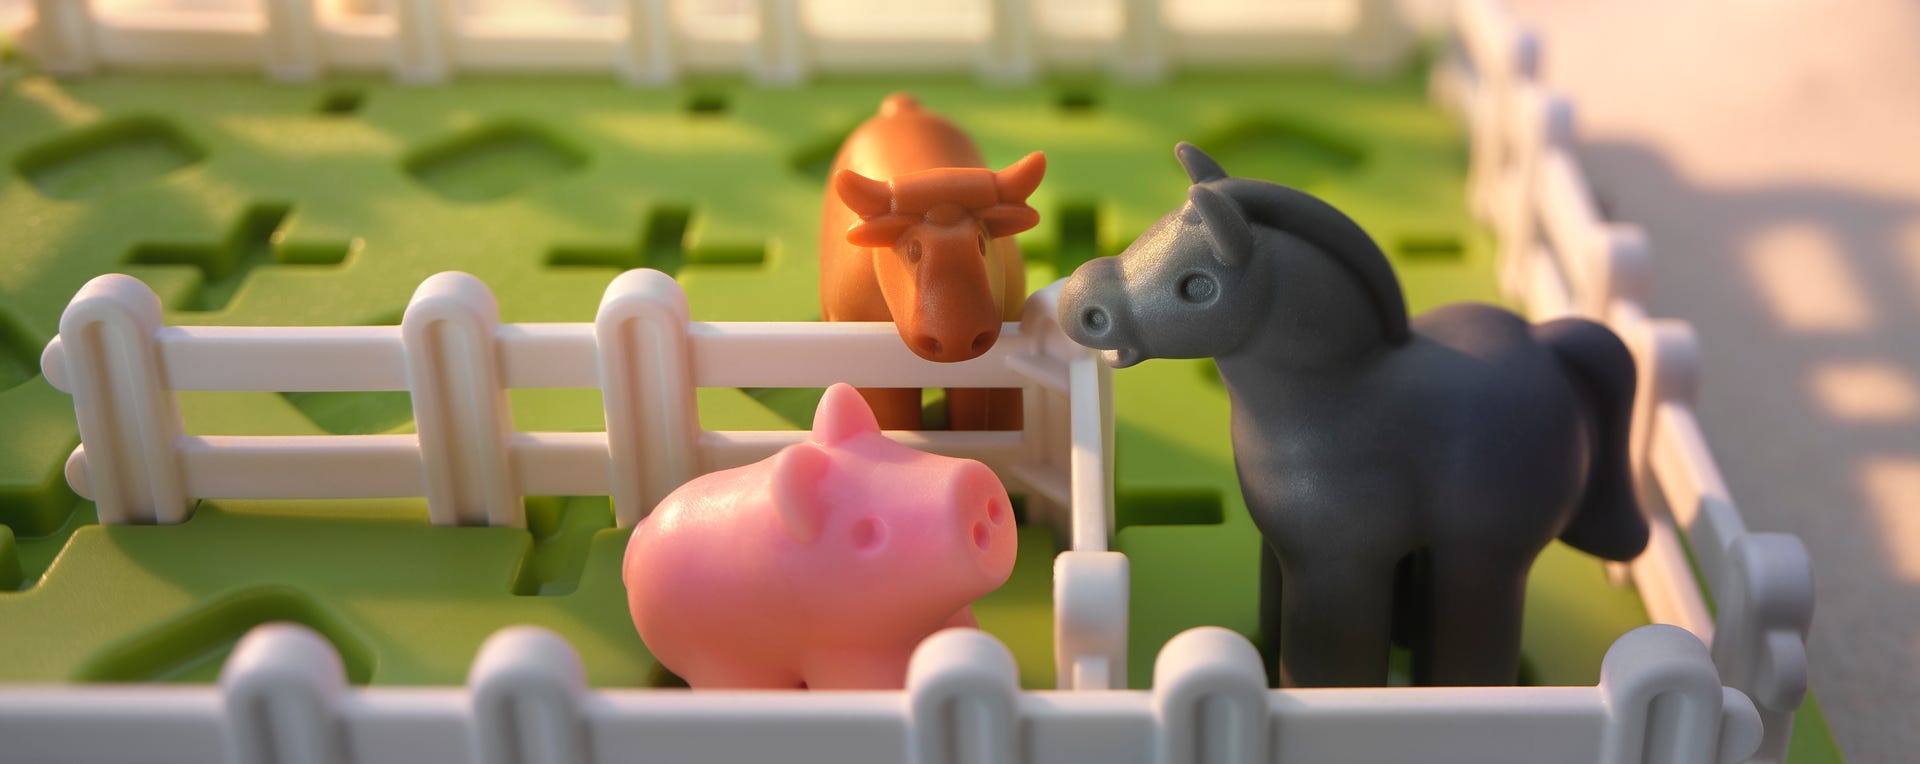 Puzzle game with horses, pigs, cows and sheep.